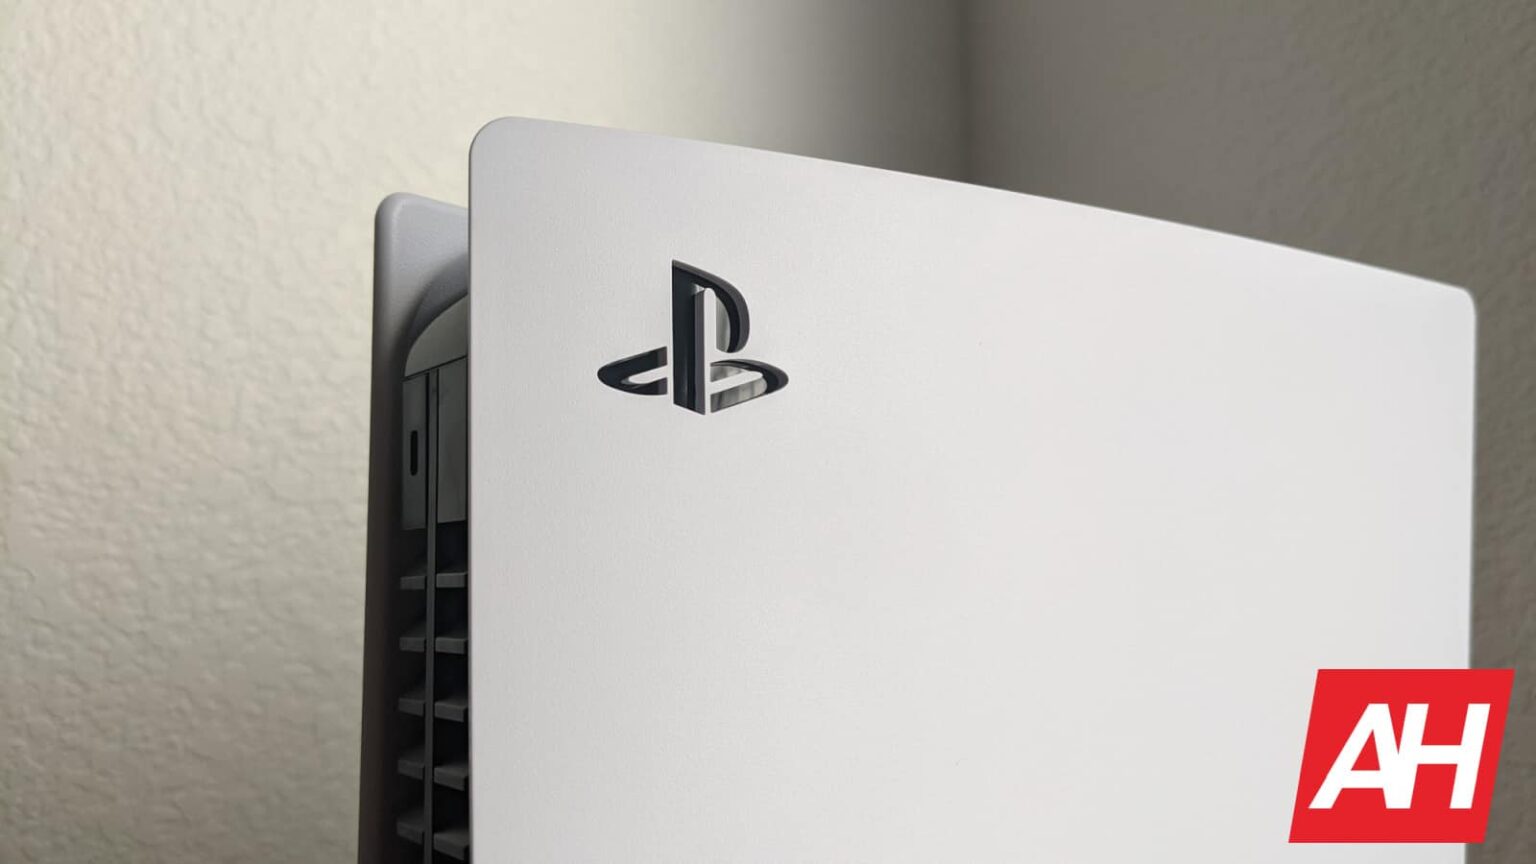 PS5 game streaming should hit the US by the end of the month